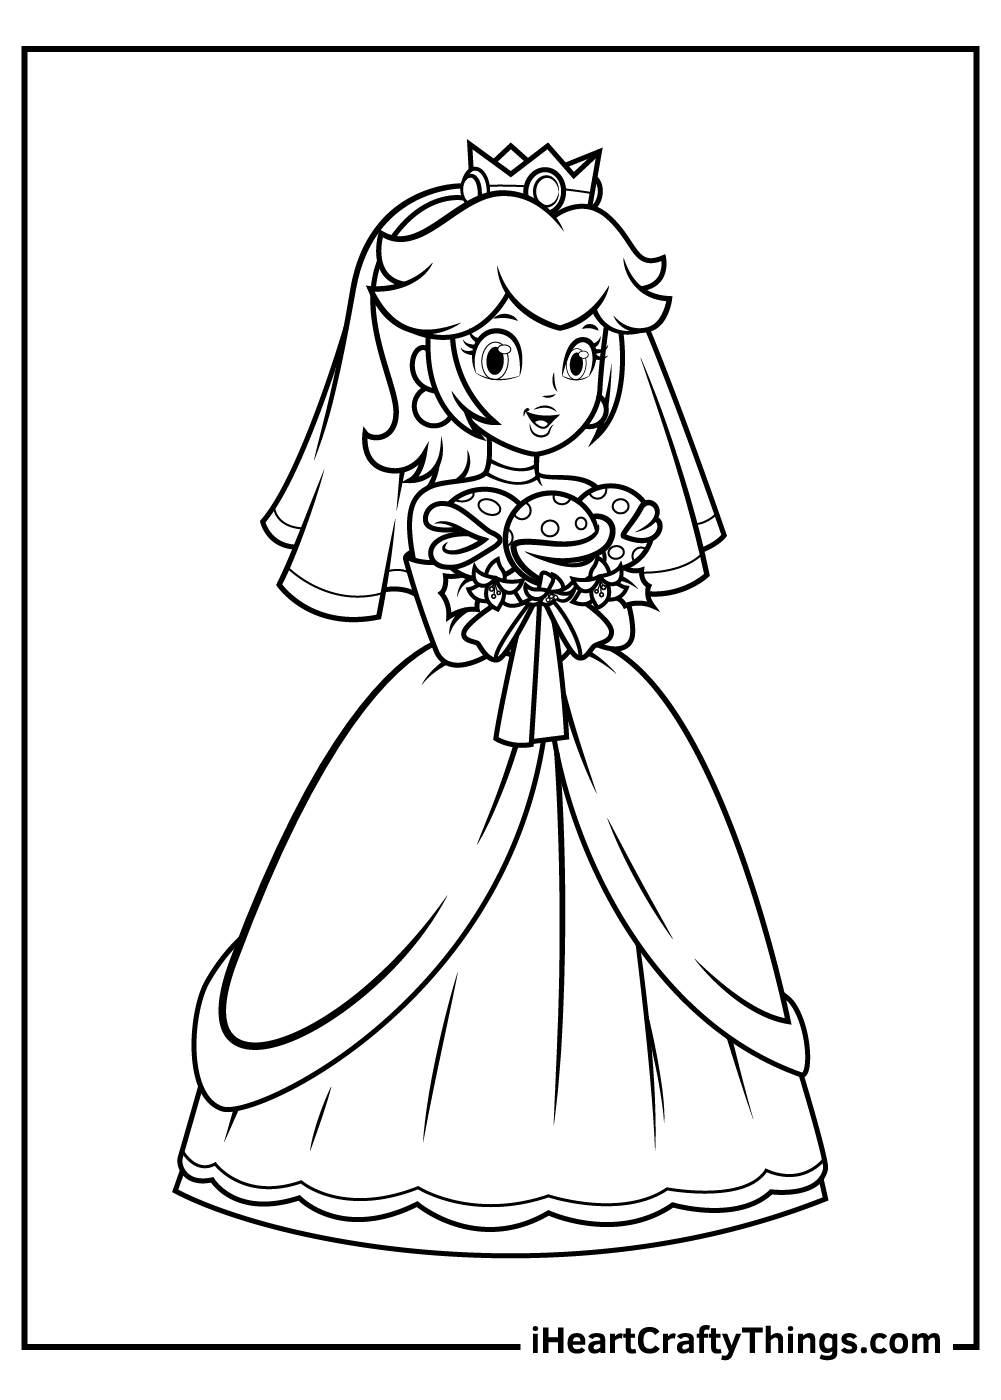 Printable Princess Peach Coloring Pages Updated 20   Coloring Home